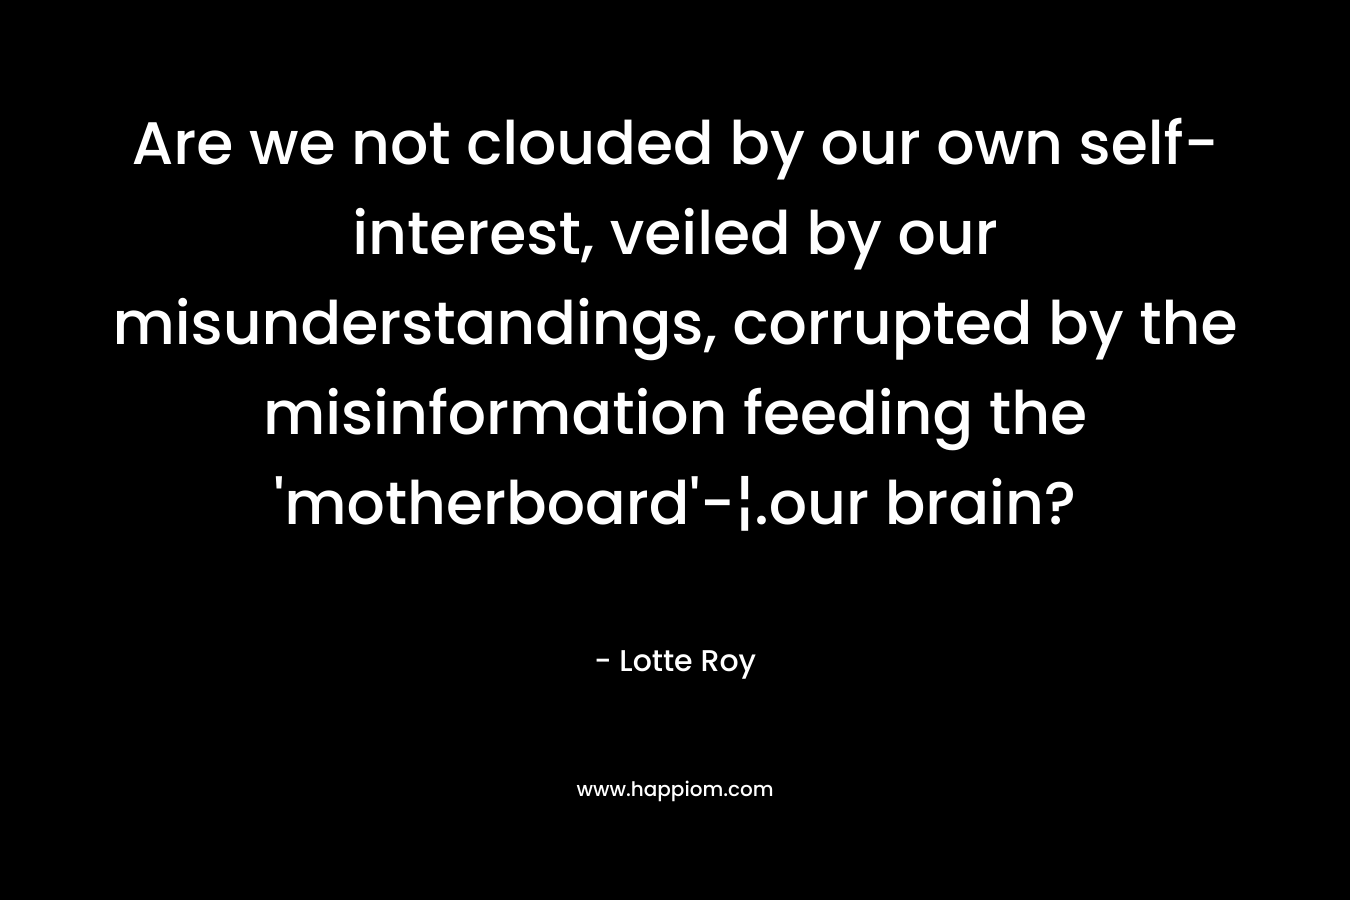 Are we not clouded by our own self-interest, veiled by our misunderstandings, corrupted by the misinformation feeding the 'motherboard'-¦.our brain?